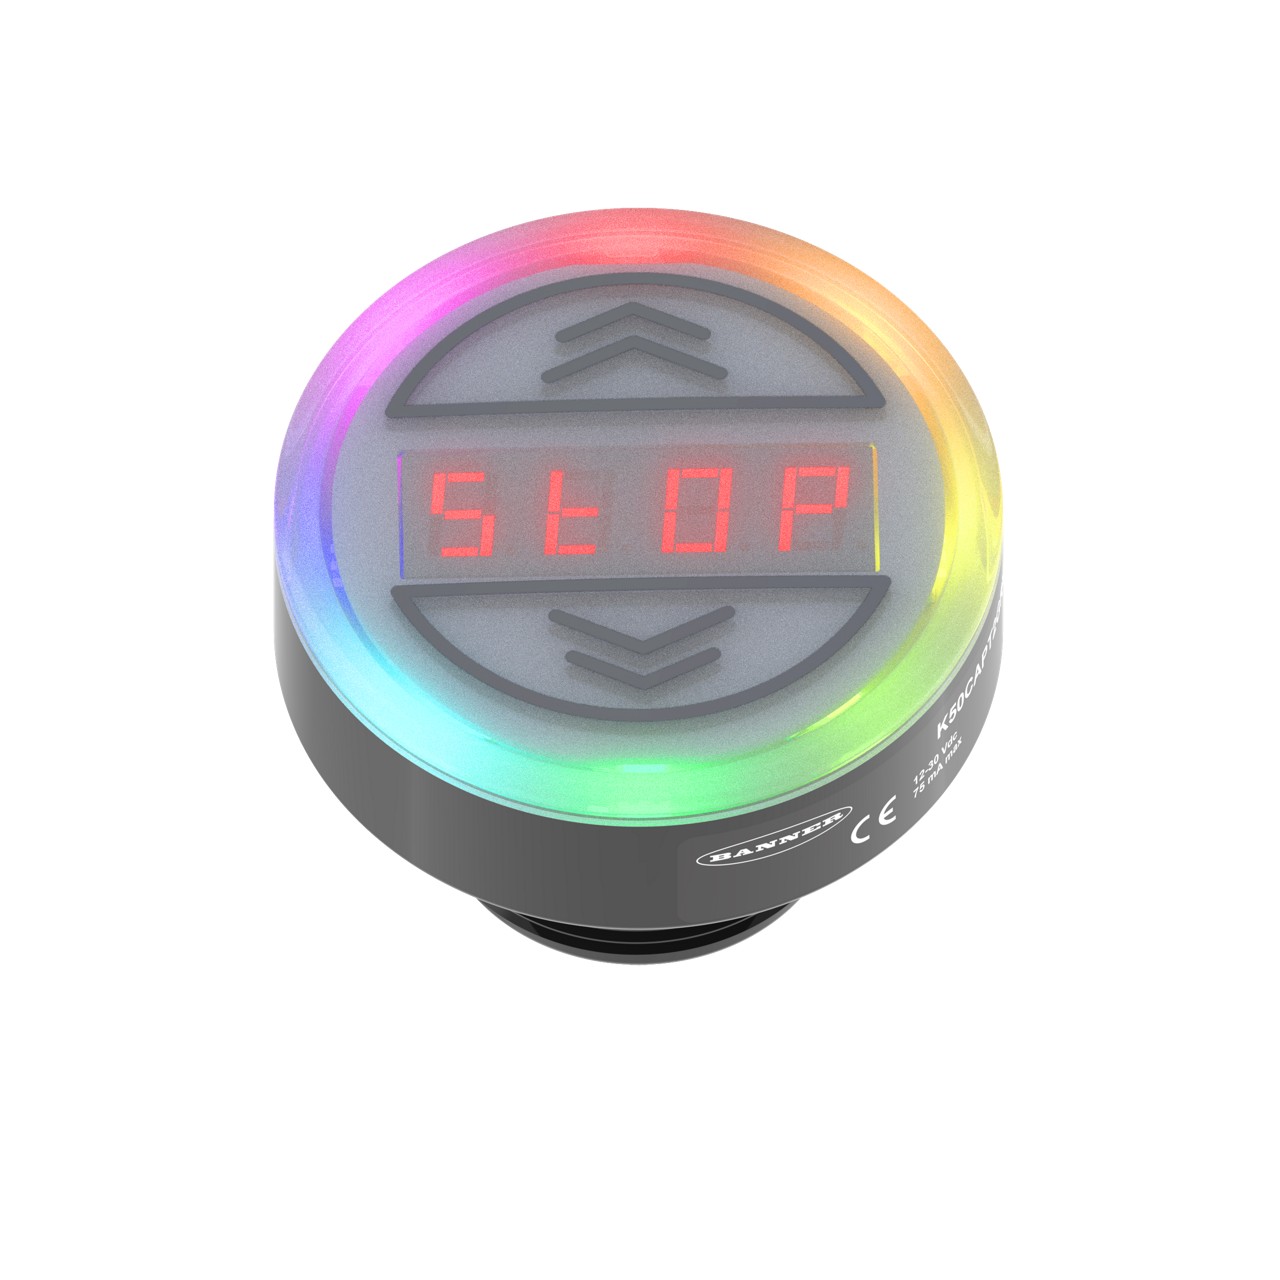 BANNER K50 PRO SERIES 50 MM PROGRAMMABLE MULTICOLOR TOUCH BUTTON